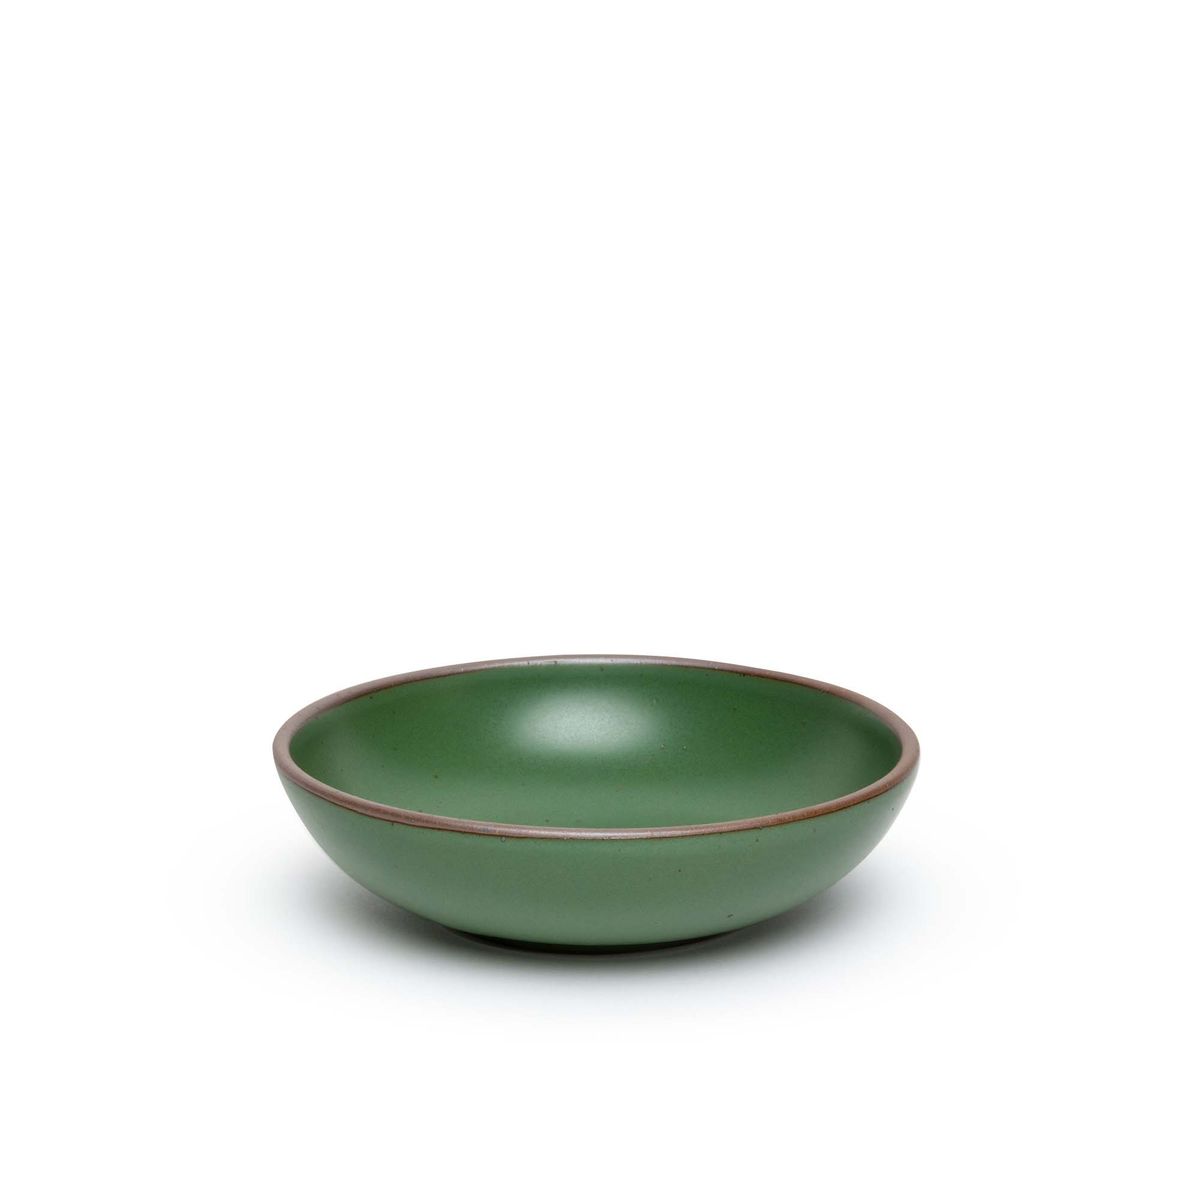 A dinner-sized shallow ceramic bowl in a deep, verdant green color featuring iron speckles and an unglazed rim